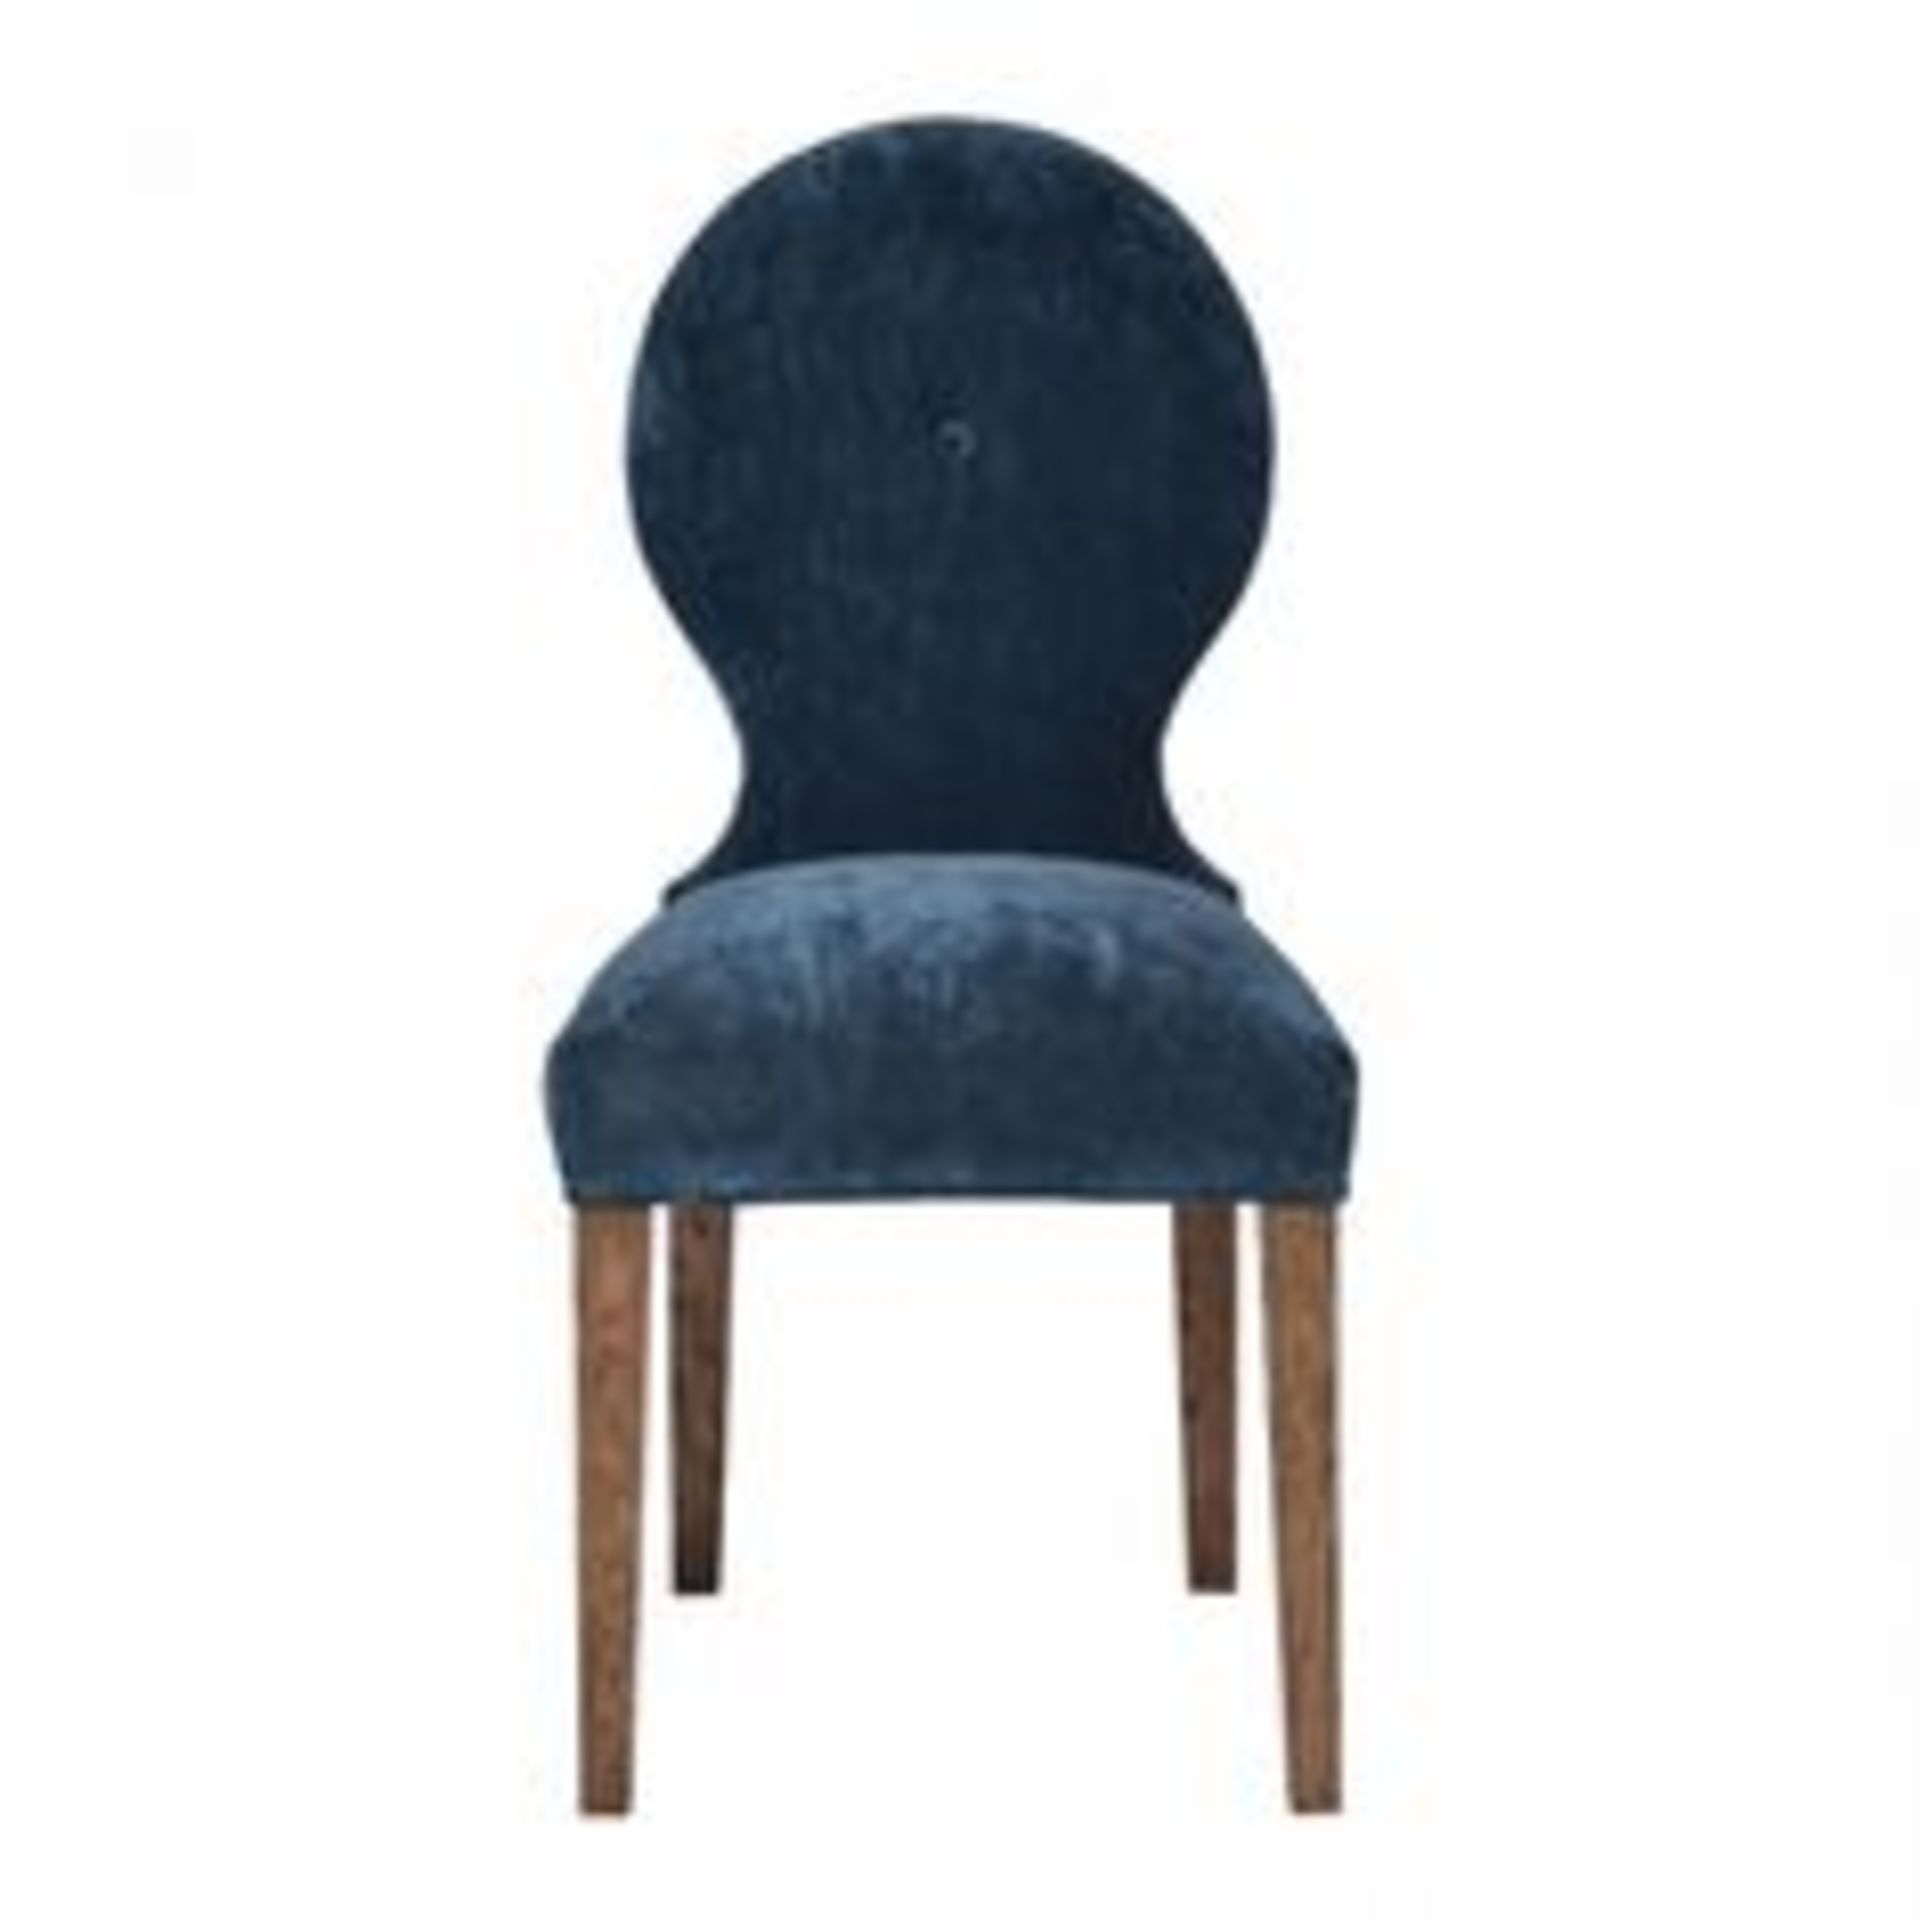 Mimosa Dining Chair Vintage Moleskin Graphite And Weathered Oak Inspired By The Art Nouveau Period